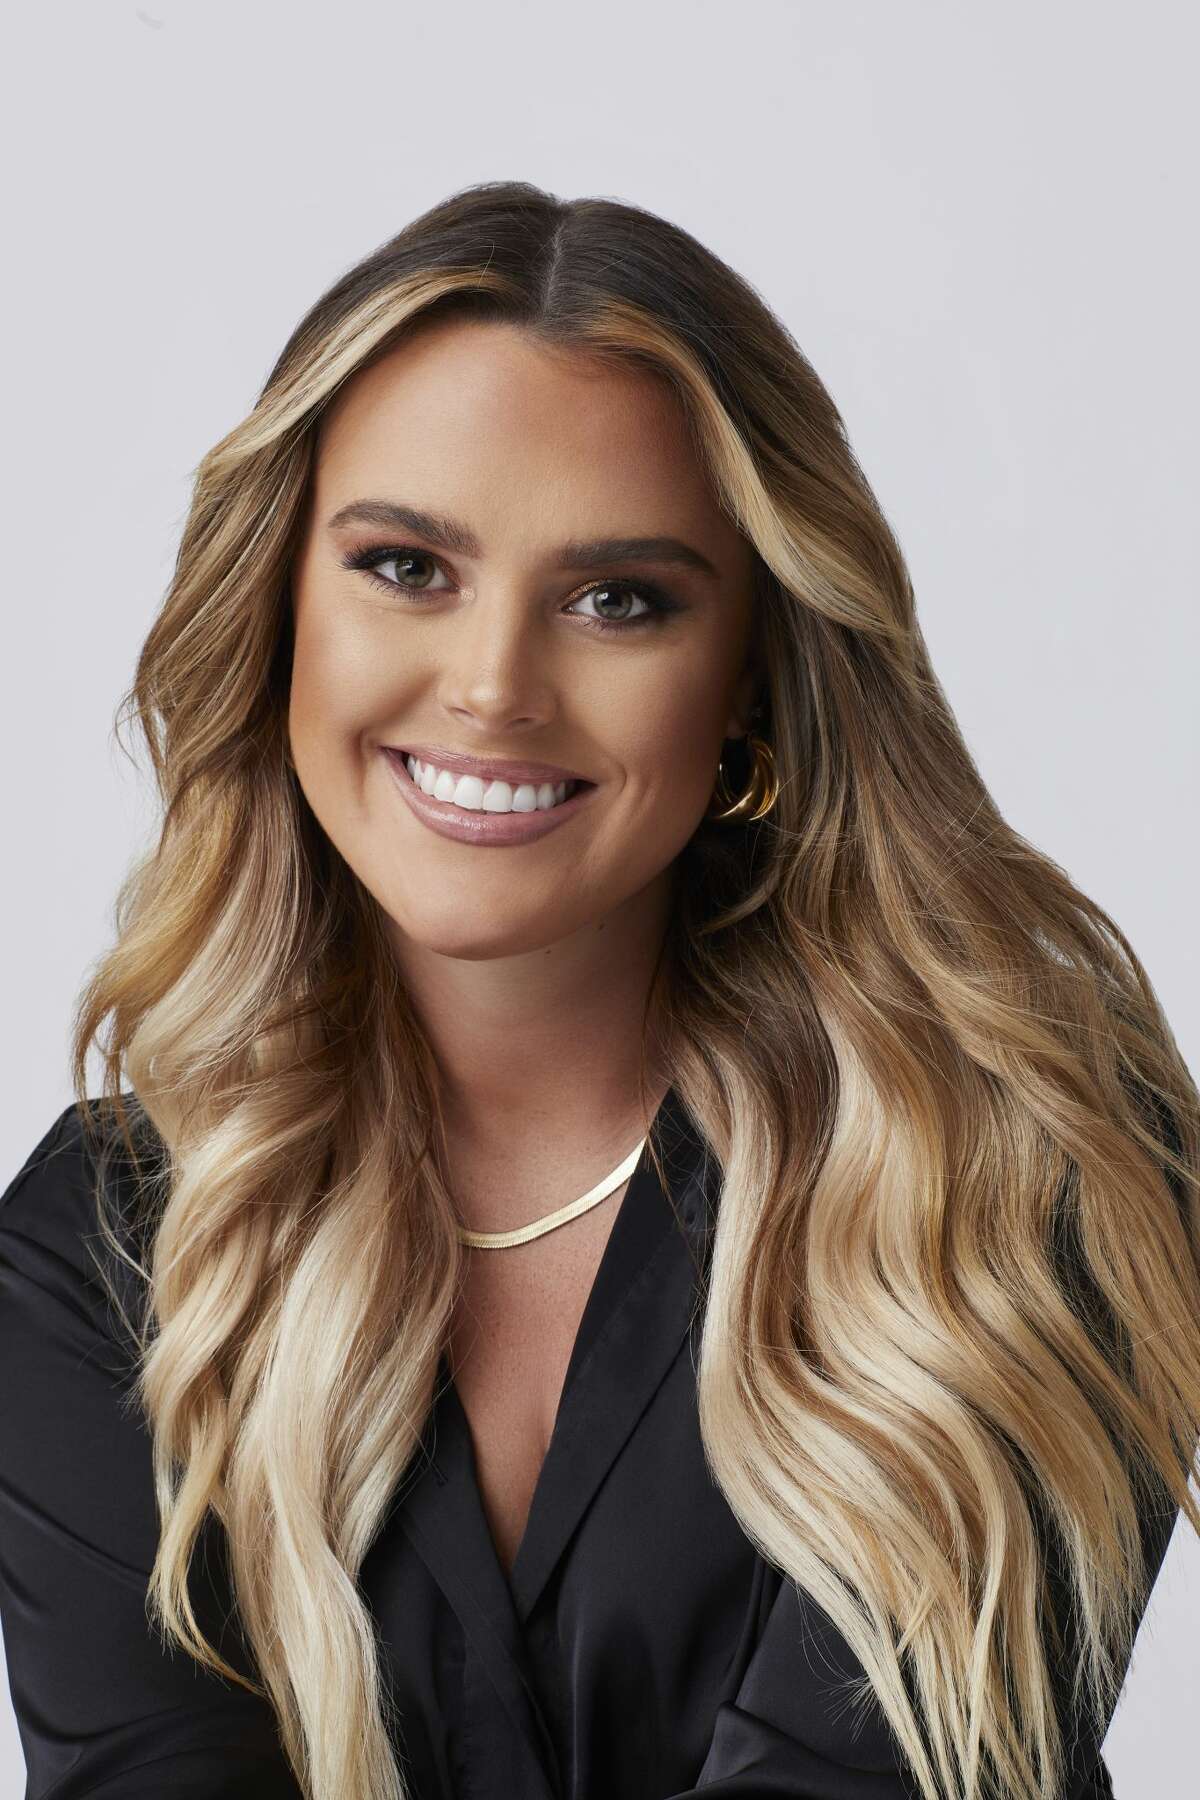 Rianna, 26, is a registered nurse from Dallas. She was sent home night 1 on the dating show. 